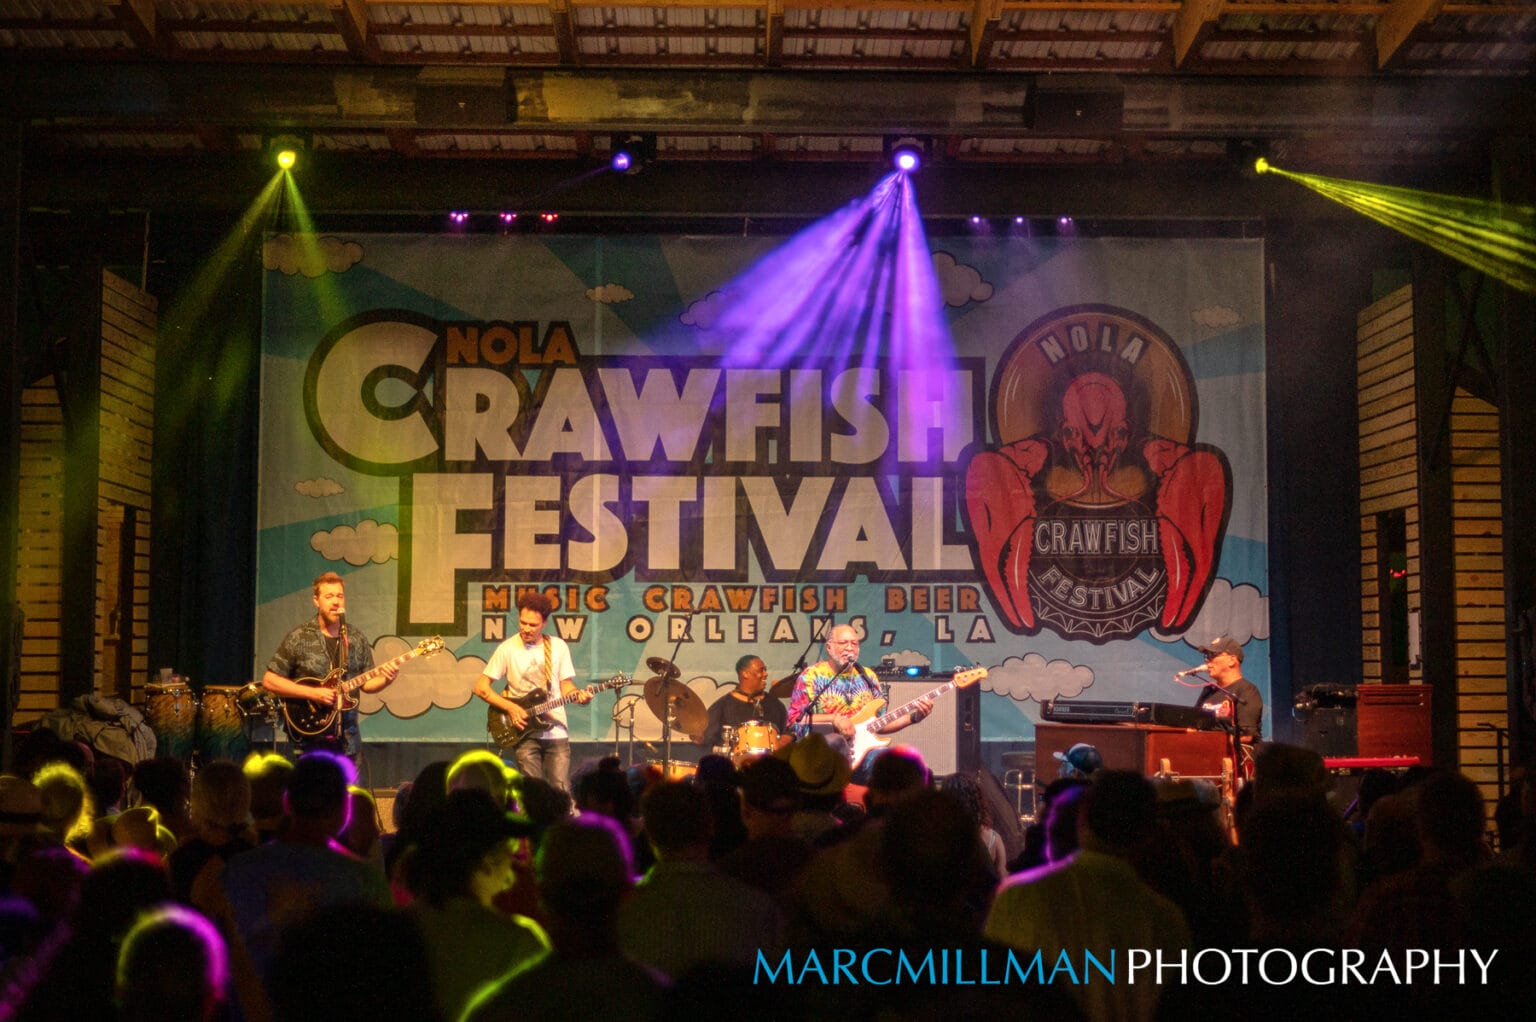 NOLA Crawfish Festival Delivers 9th Annual Artist Lineup Jon Cleary